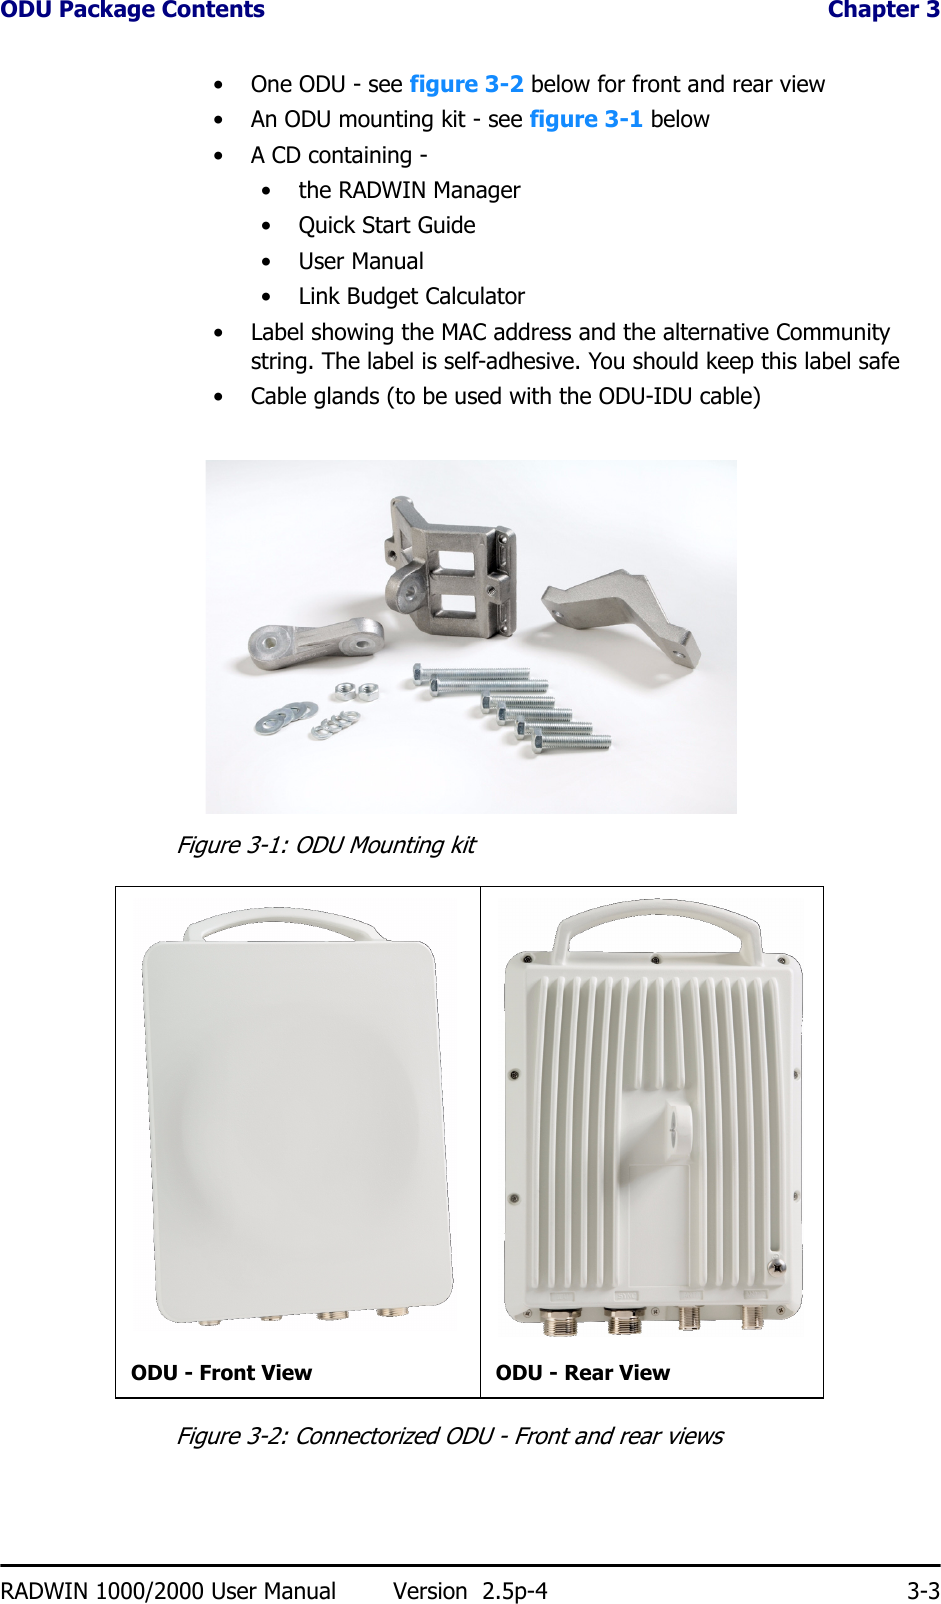 ODU Package Contents  Chapter 3RADWIN 1000/2000 User Manual Version  2.5p-4 3-3• One ODU - see figure 3-2 below for front and rear view• An ODU mounting kit - see figure 3-1 below• A CD containing -• the RADWIN Manager•Quick Start Guide• User Manual• Link Budget Calculator• Label showing the MAC address and the alternative Community string. The label is self-adhesive. You should keep this label safe• Cable glands (to be used with the ODU-IDU cable)Figure 3-1: ODU Mounting kitFigure 3-2: Connectorized ODU - Front and rear viewsODU - Front View ODU - Rear View